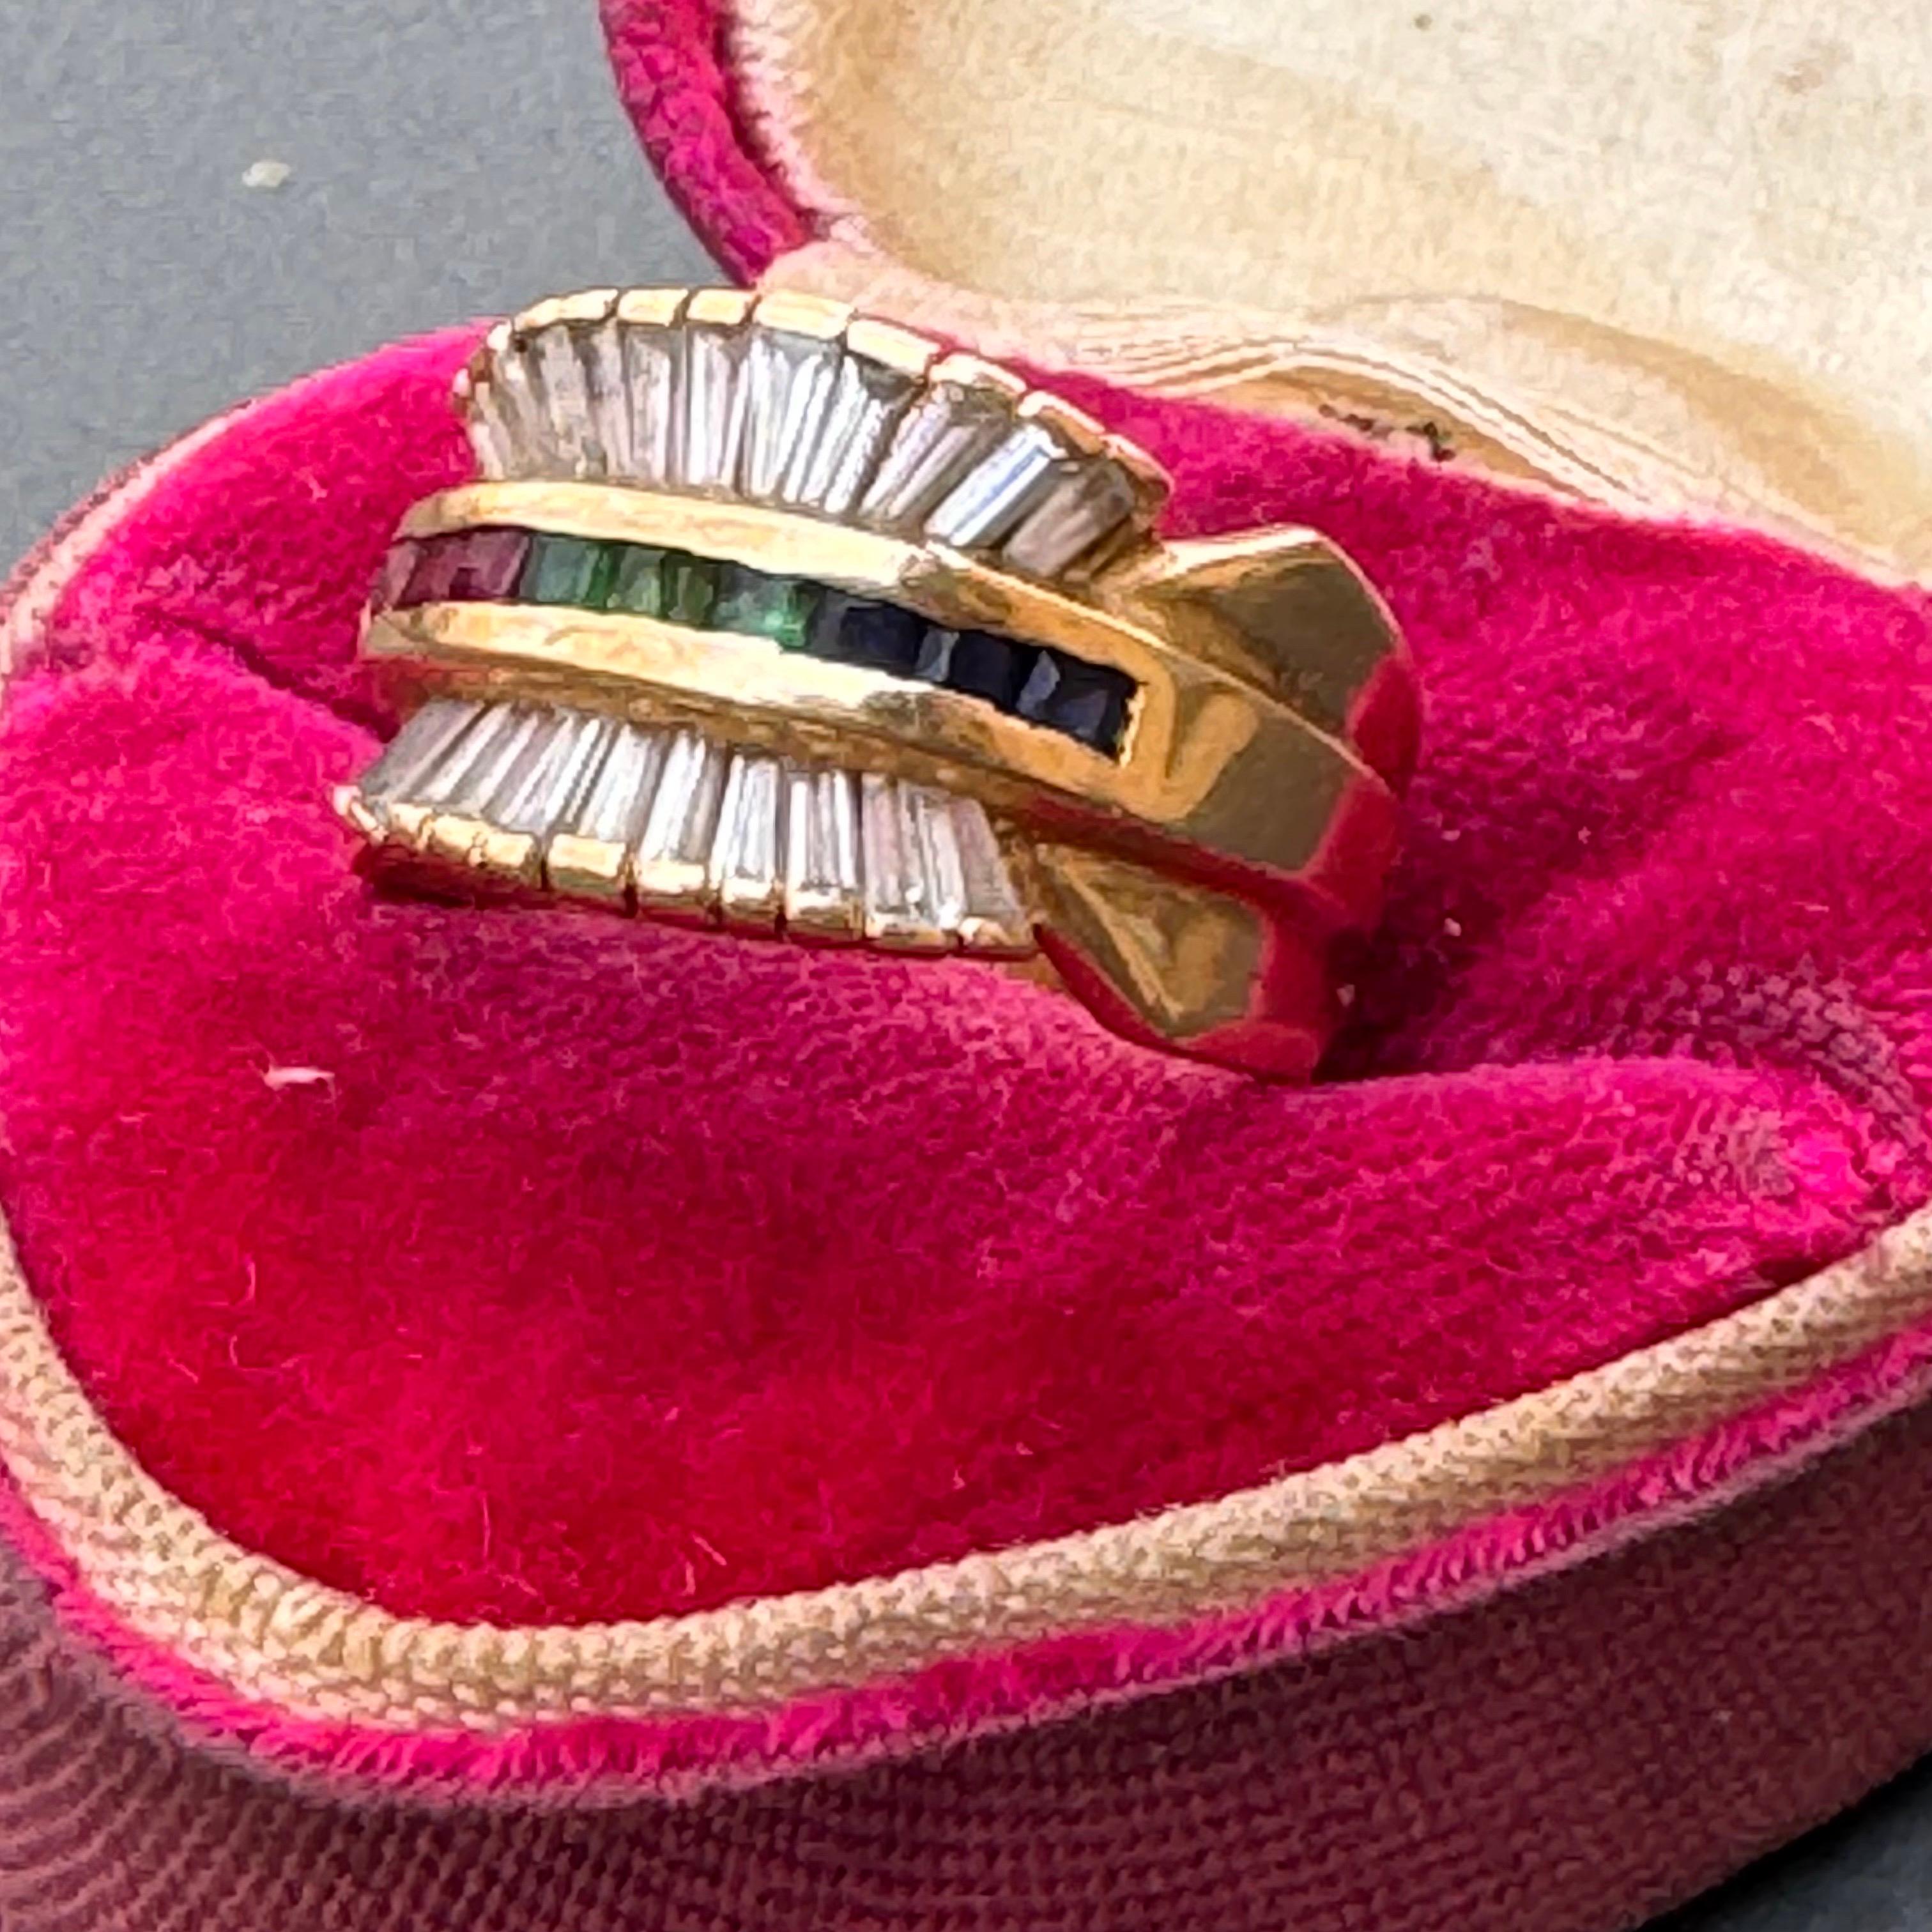 Vintage handmade 18kt solid yellow gold cigar band style ring with white sapphire baguettes and lab created colored stones in center. 
Most likely made in India .

Dates : late 20th century

Measurements:
Ring size 6 1/2 - 7 and measures Bangle